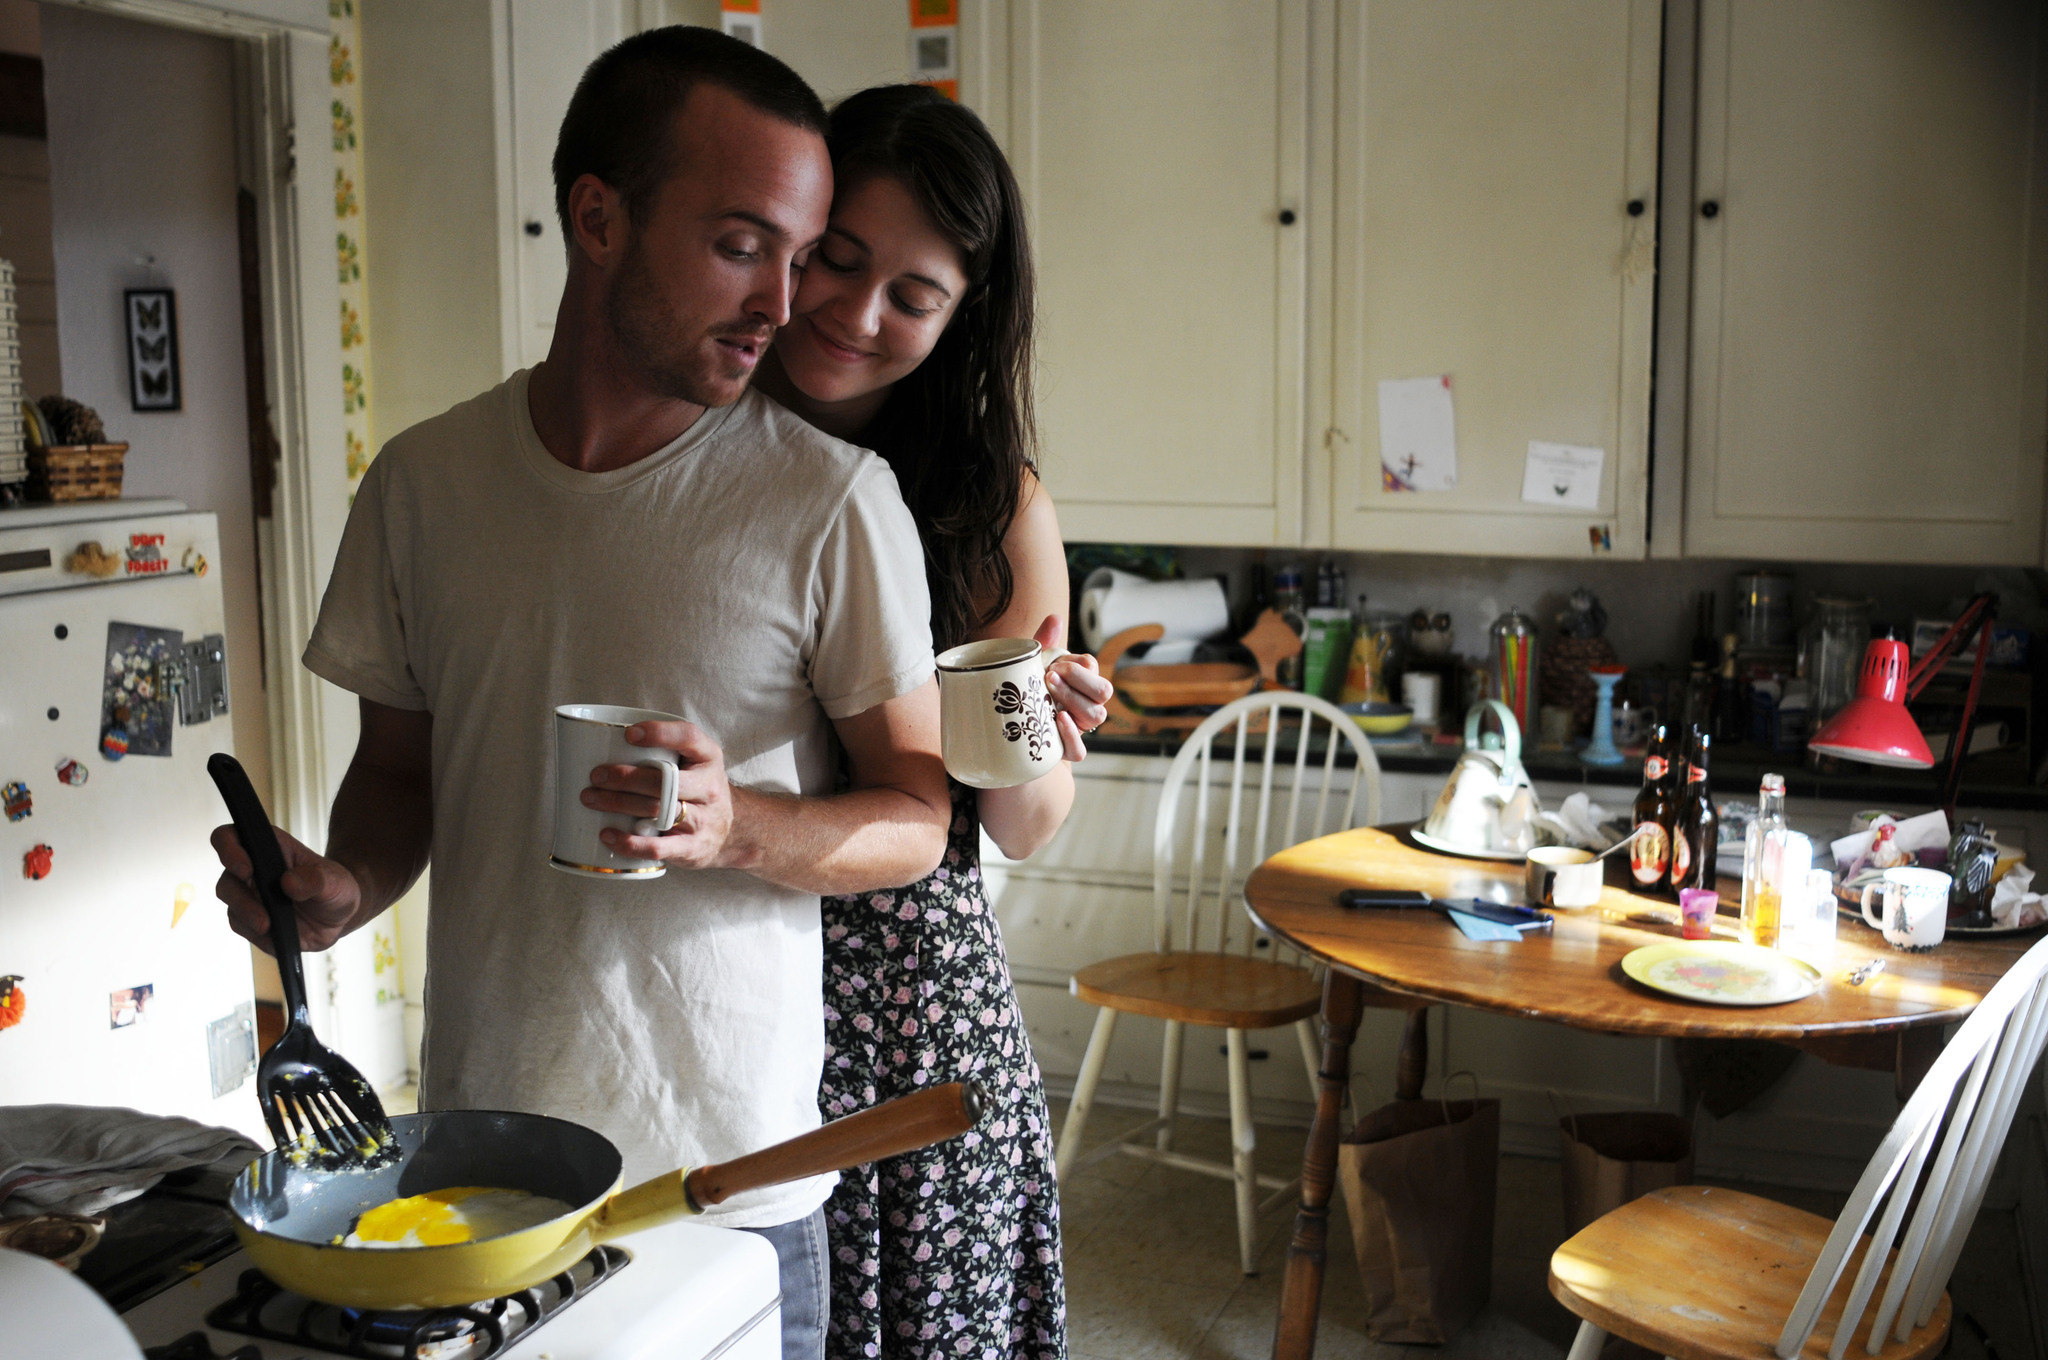 Still of Aaron Paul and Mary Elizabeth Winstead in Smashed (2012)